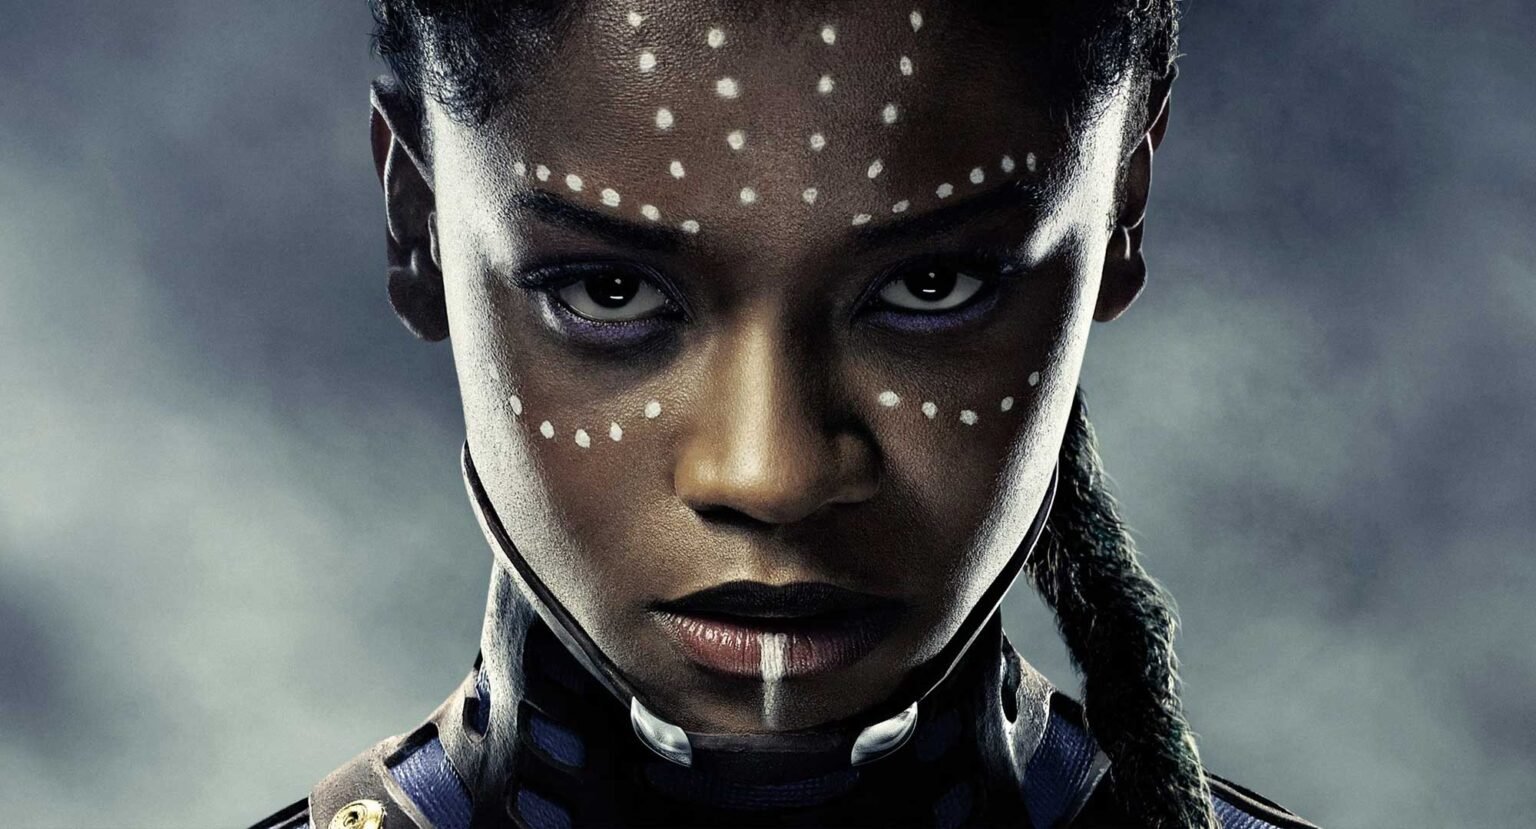 Marvel Comics isn't lacking for villains. Who will be the antagonist in the upcoming 'Black Panther: Wakanda Forever'? Geek out with these casting rumors!